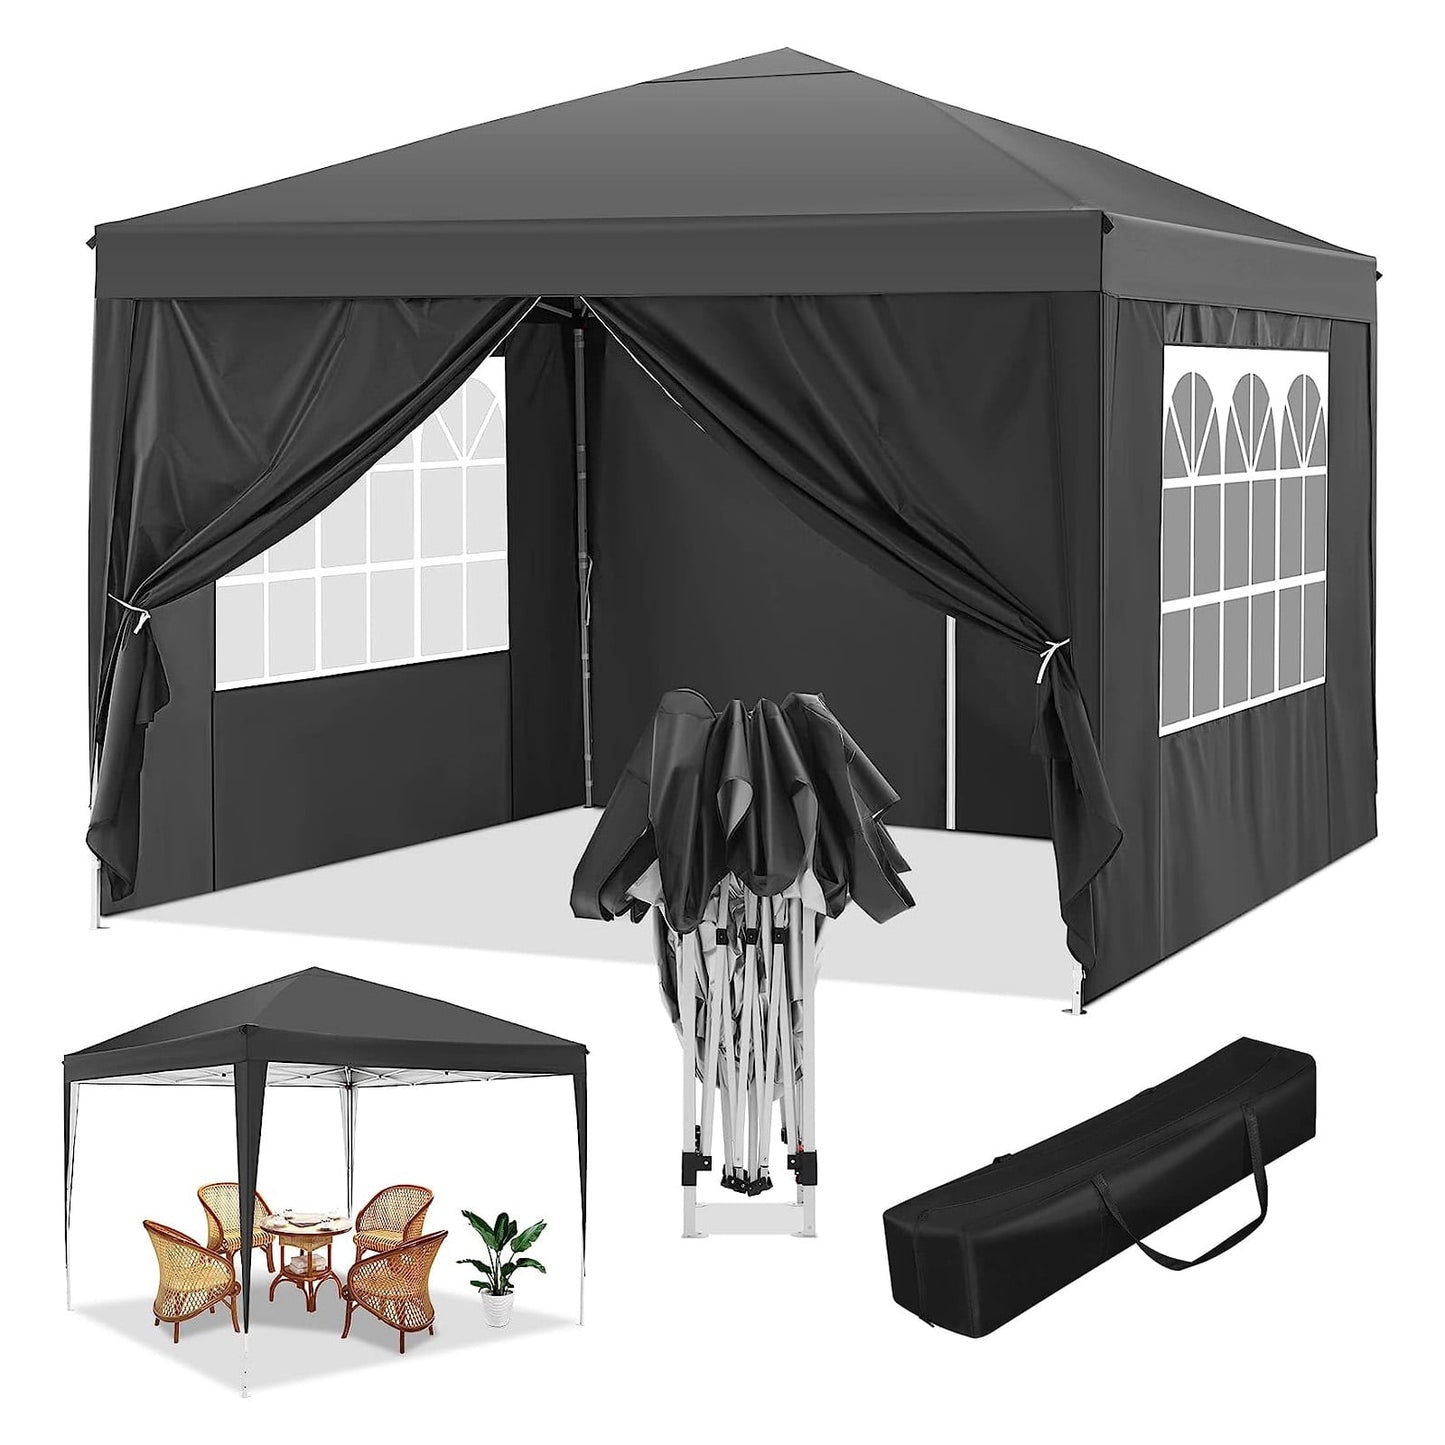 Canopy 10x10 Waterproof Pop up Canopy Tent with 4 Sidewalls, Instant Outdoor Event Shelter Tent for Parties Sun Shade Party Commercial Canopy, Carry Bag, Black